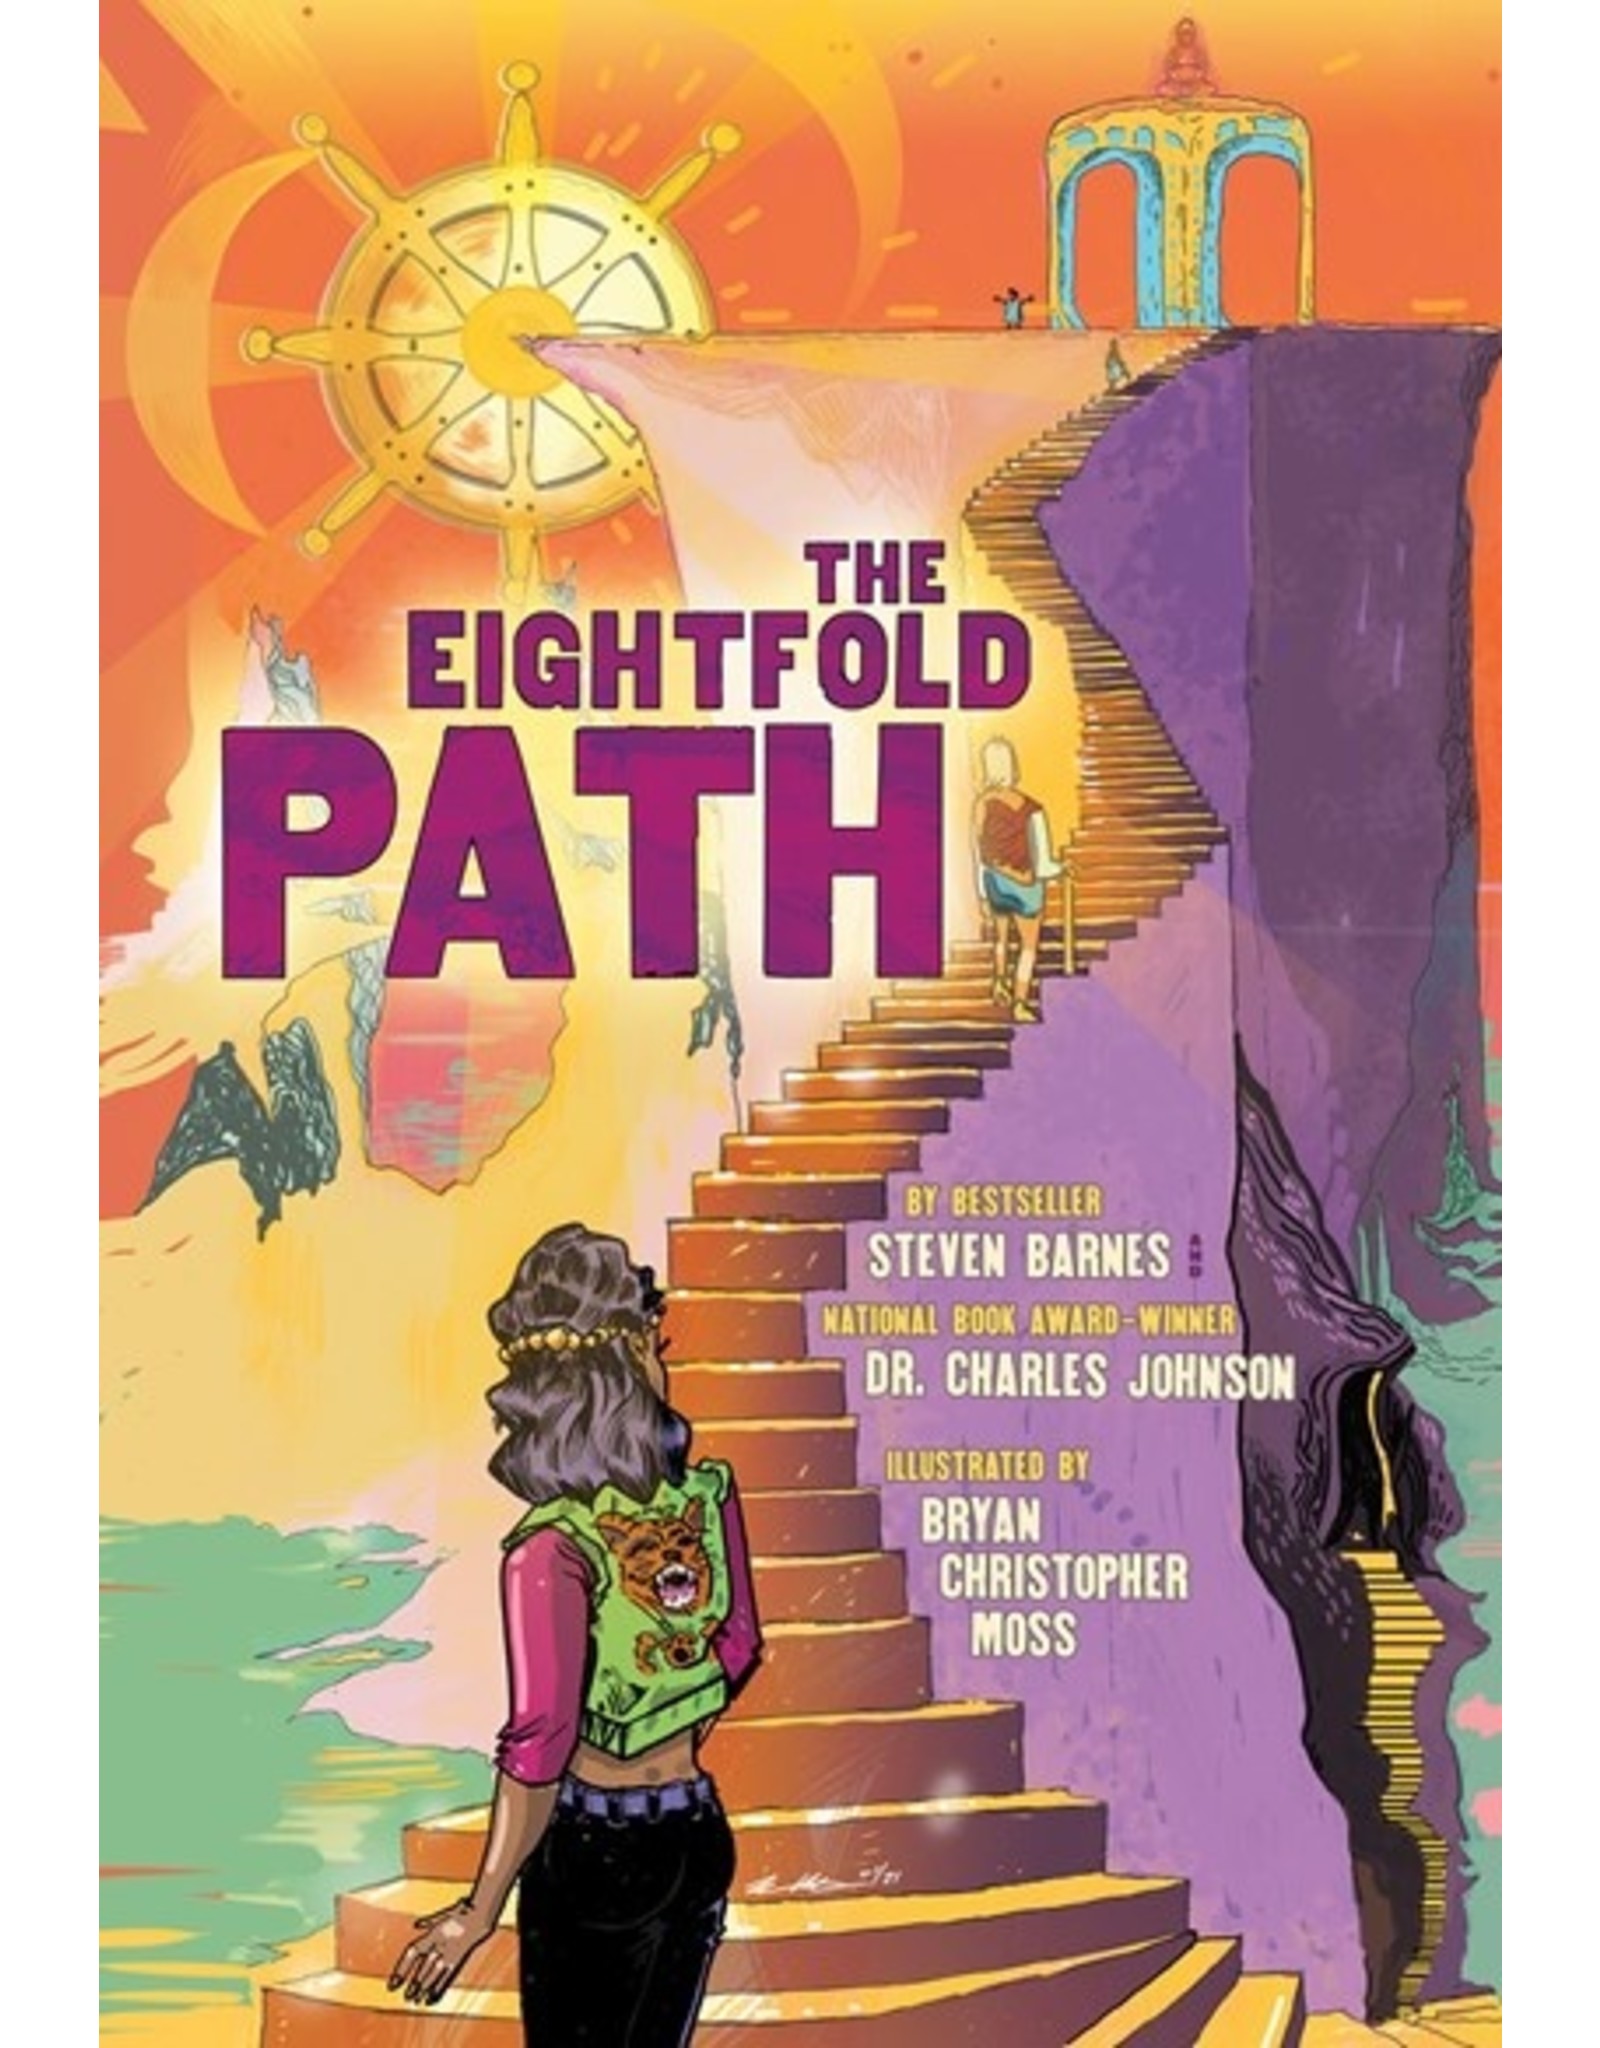 Books The Eightfold Path by Steven Barnes and Dr. Charles Johnson Illustrated by Bryan Christopher Moss